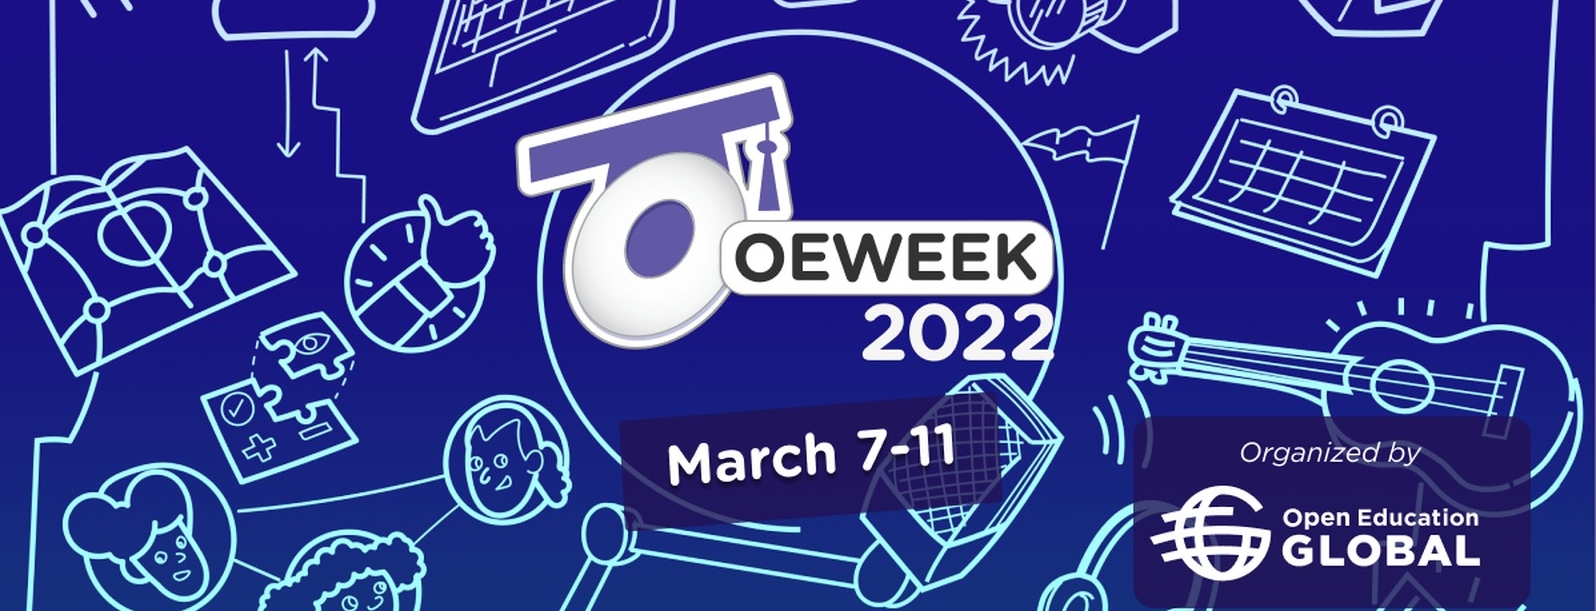 banner image for OEweek2022 